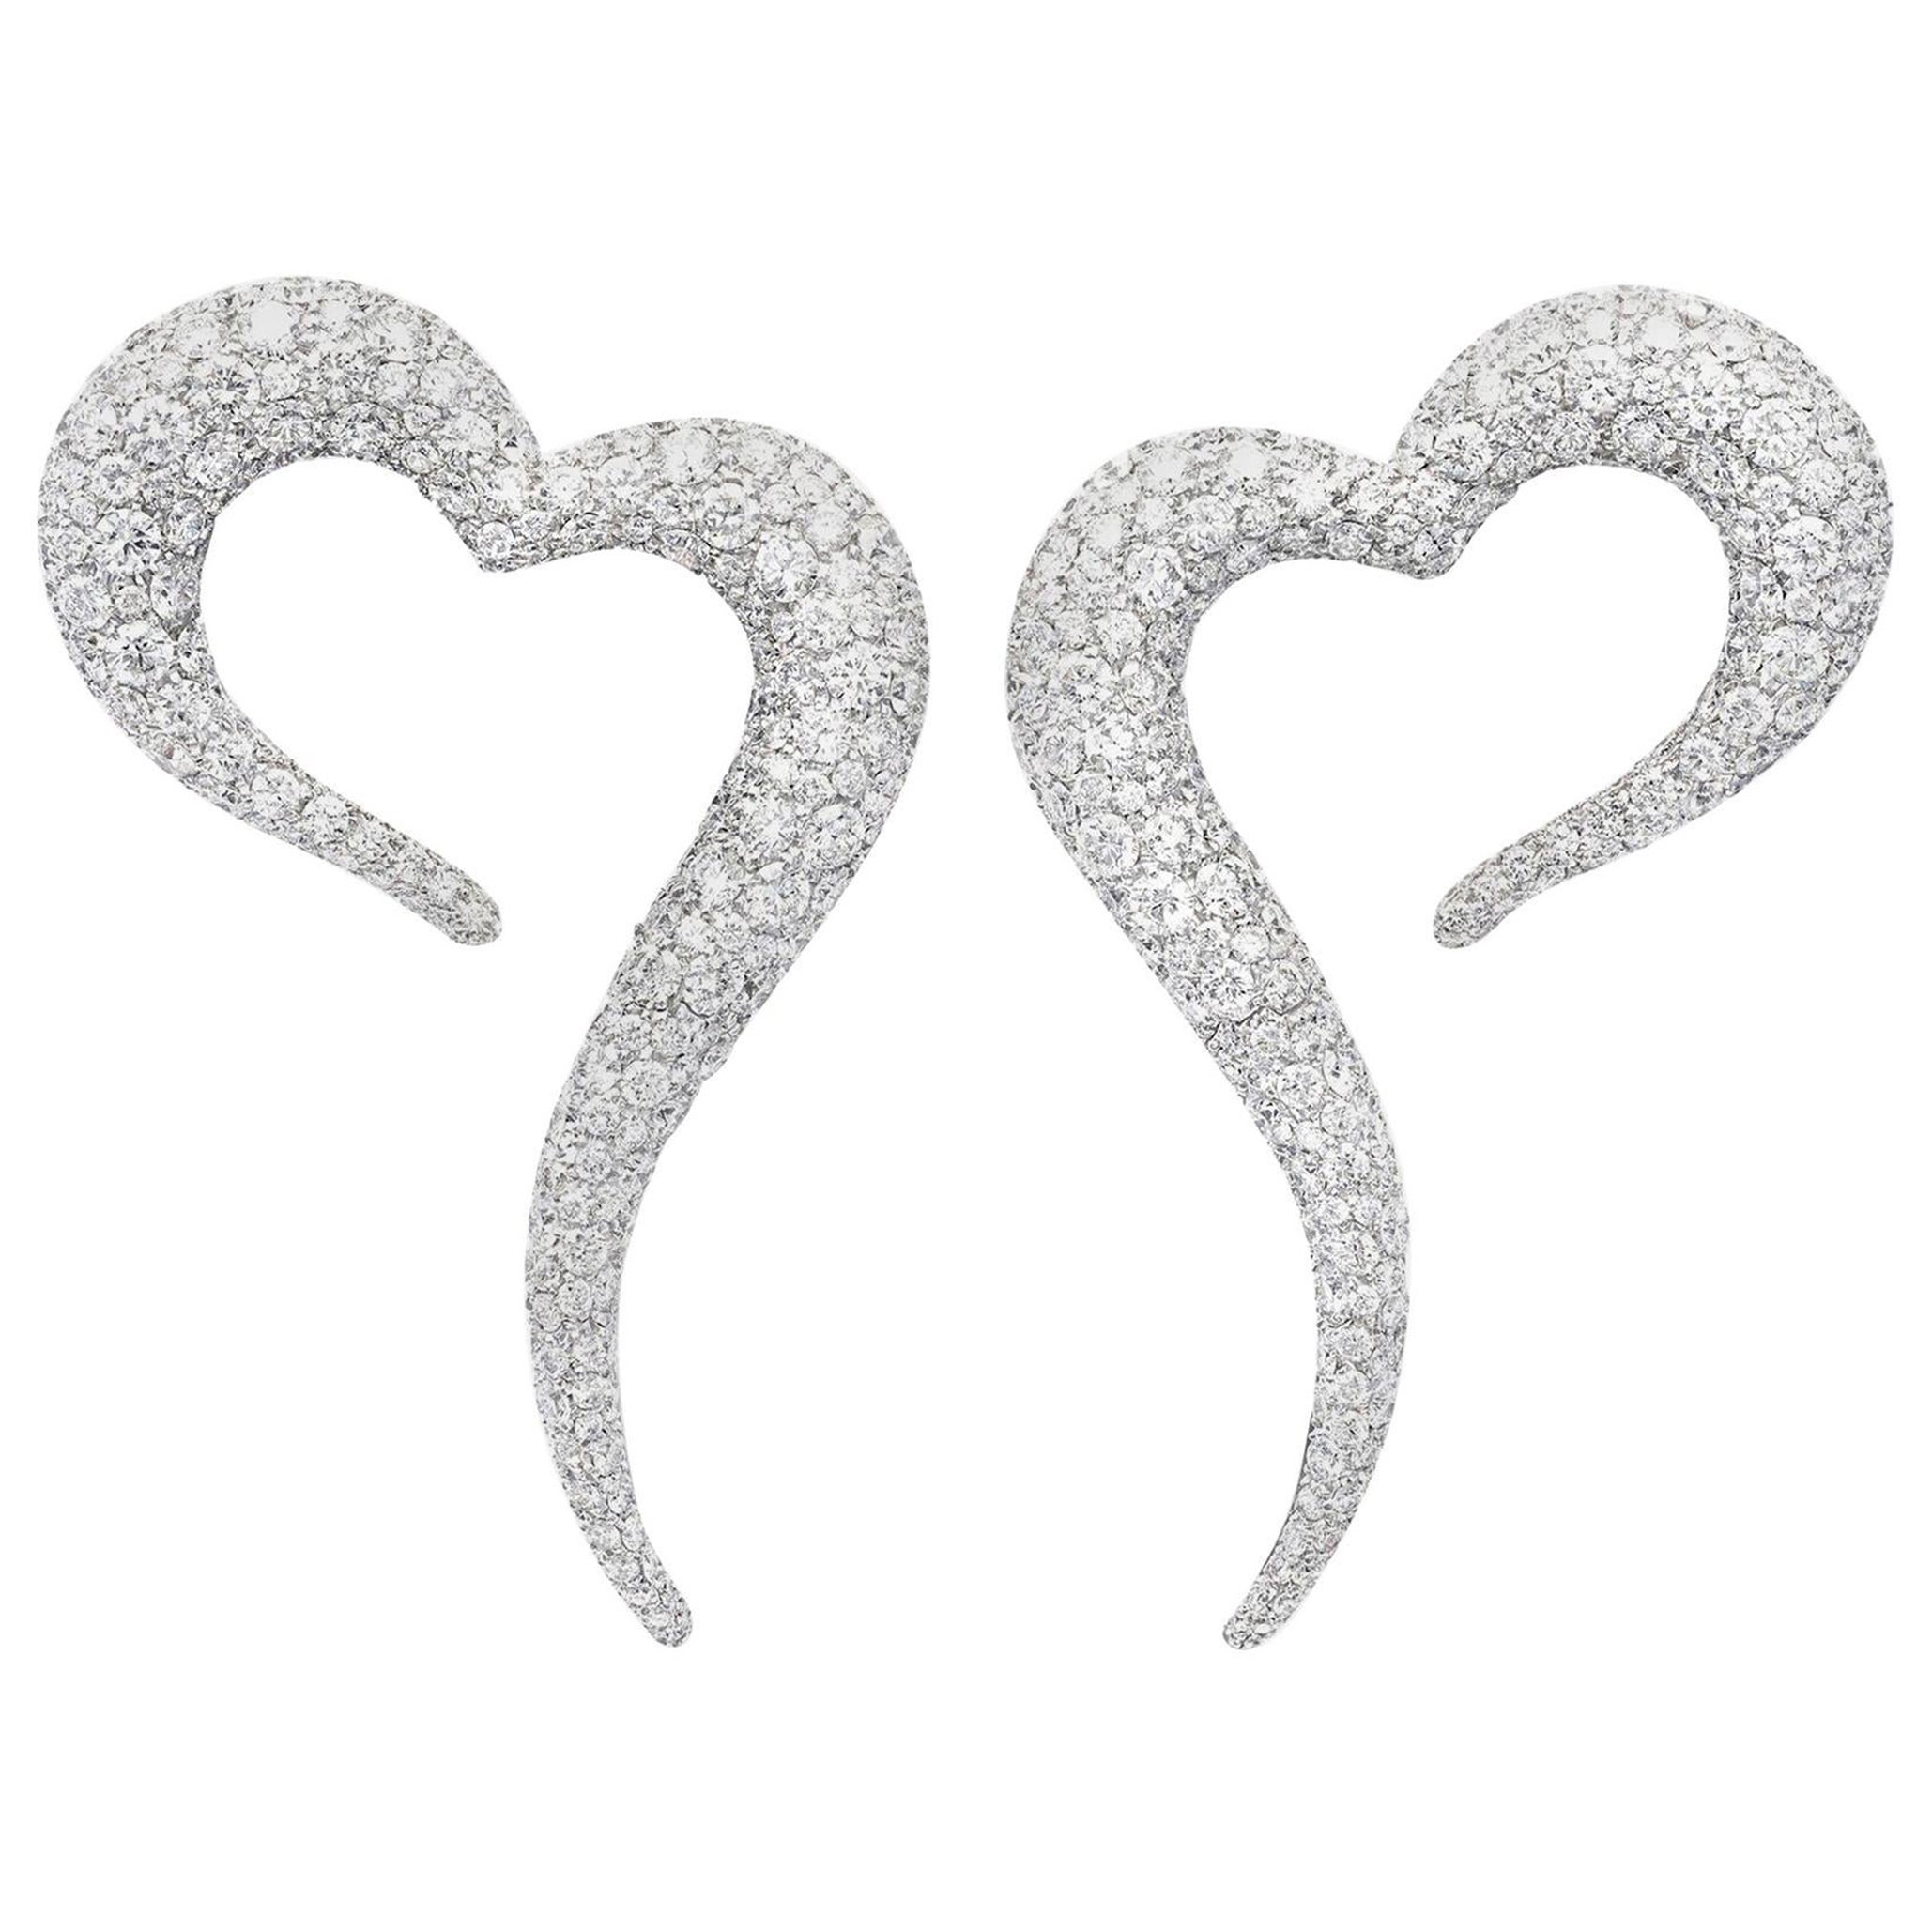 18 Karat White Gold and White Diamonds Large Heart Shaped Earrings For Sale